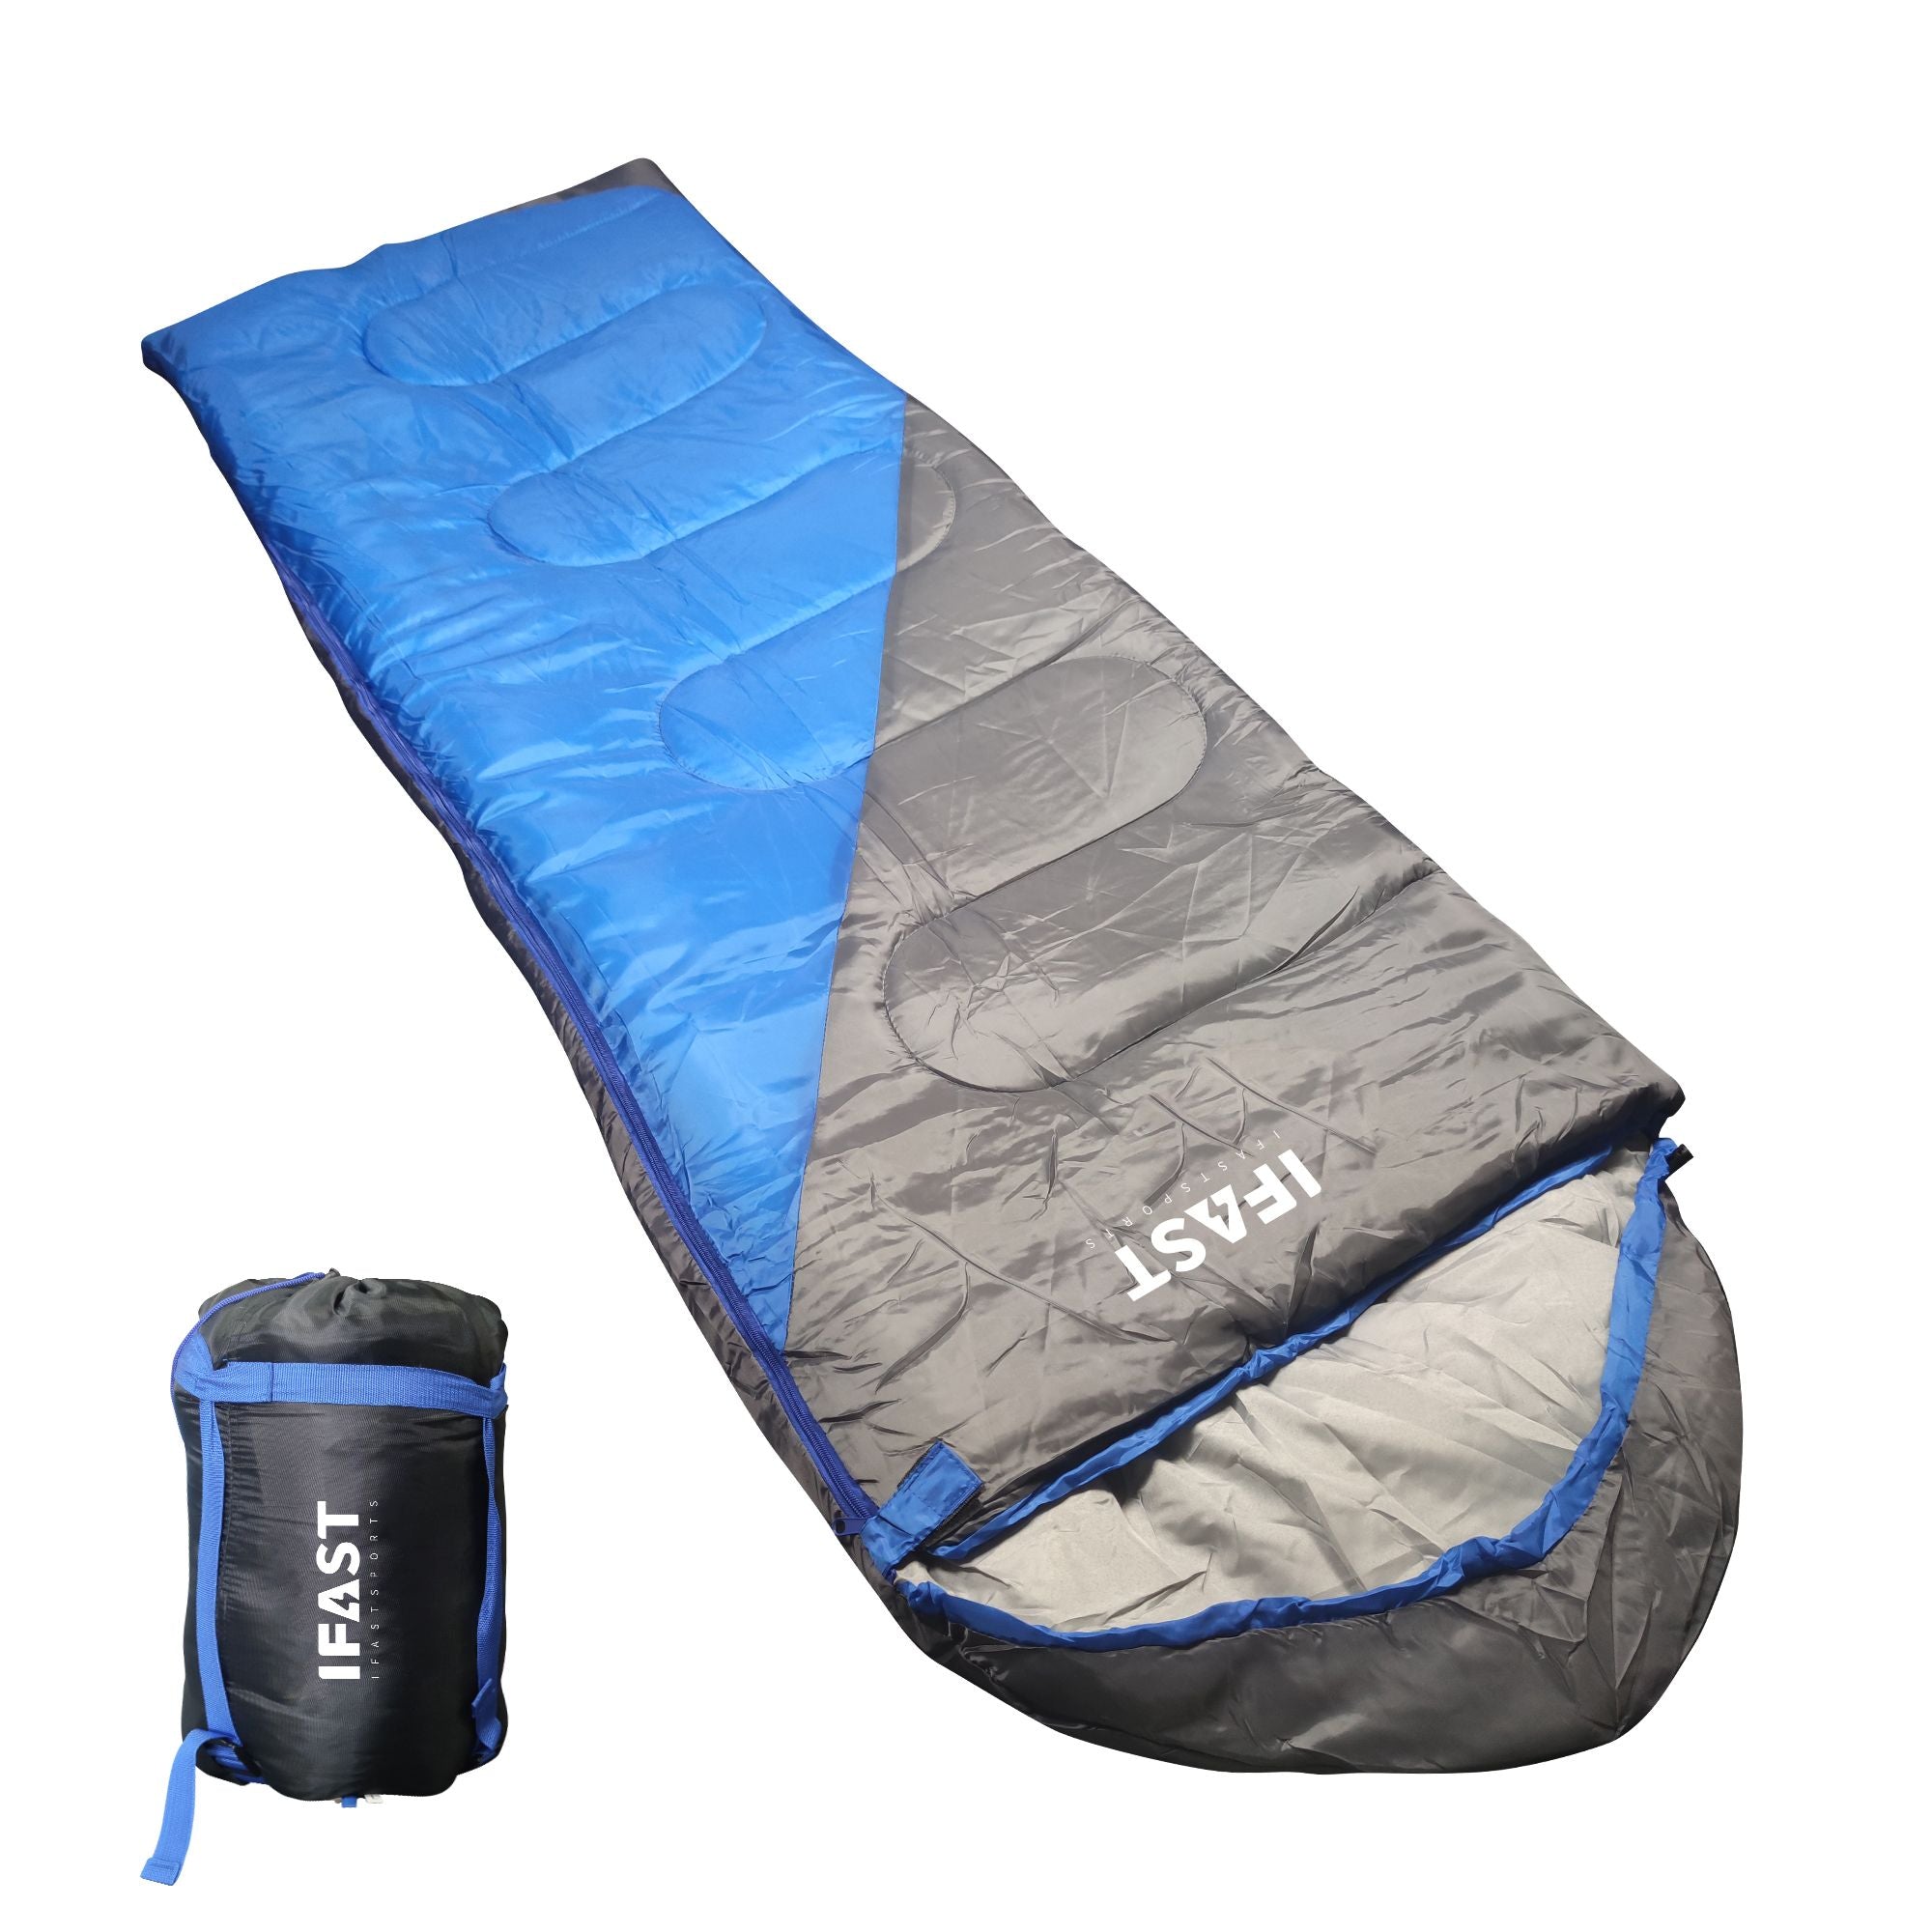 Excavation rice Rust Lightweight Sleeping Bags Beds | Camping Gear Equipment | IFAST – IFAST  SPORTS